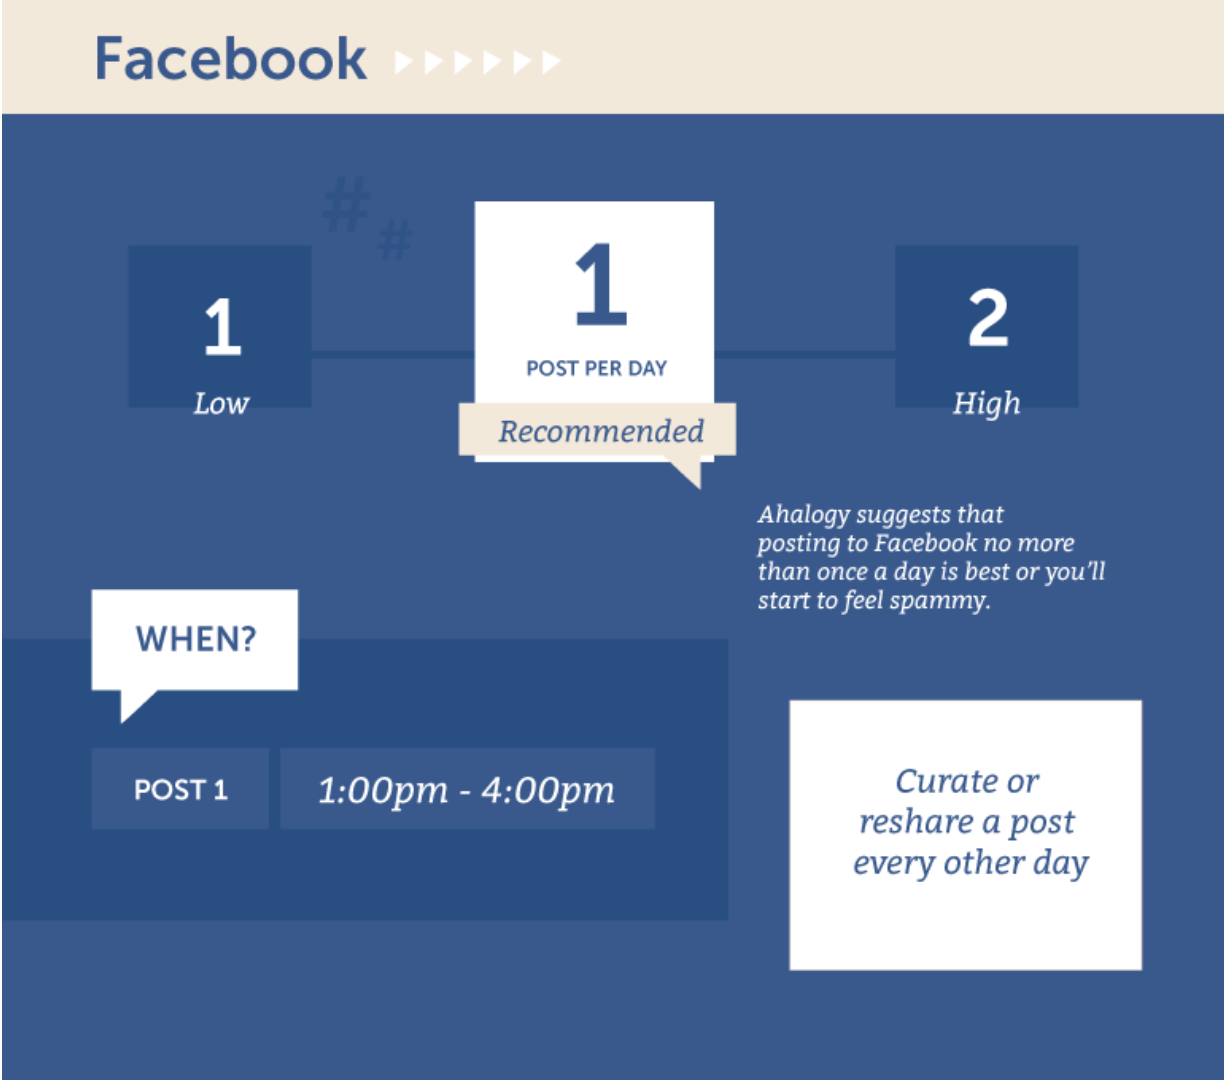 An infographic showing how often to make posts on Facebook.